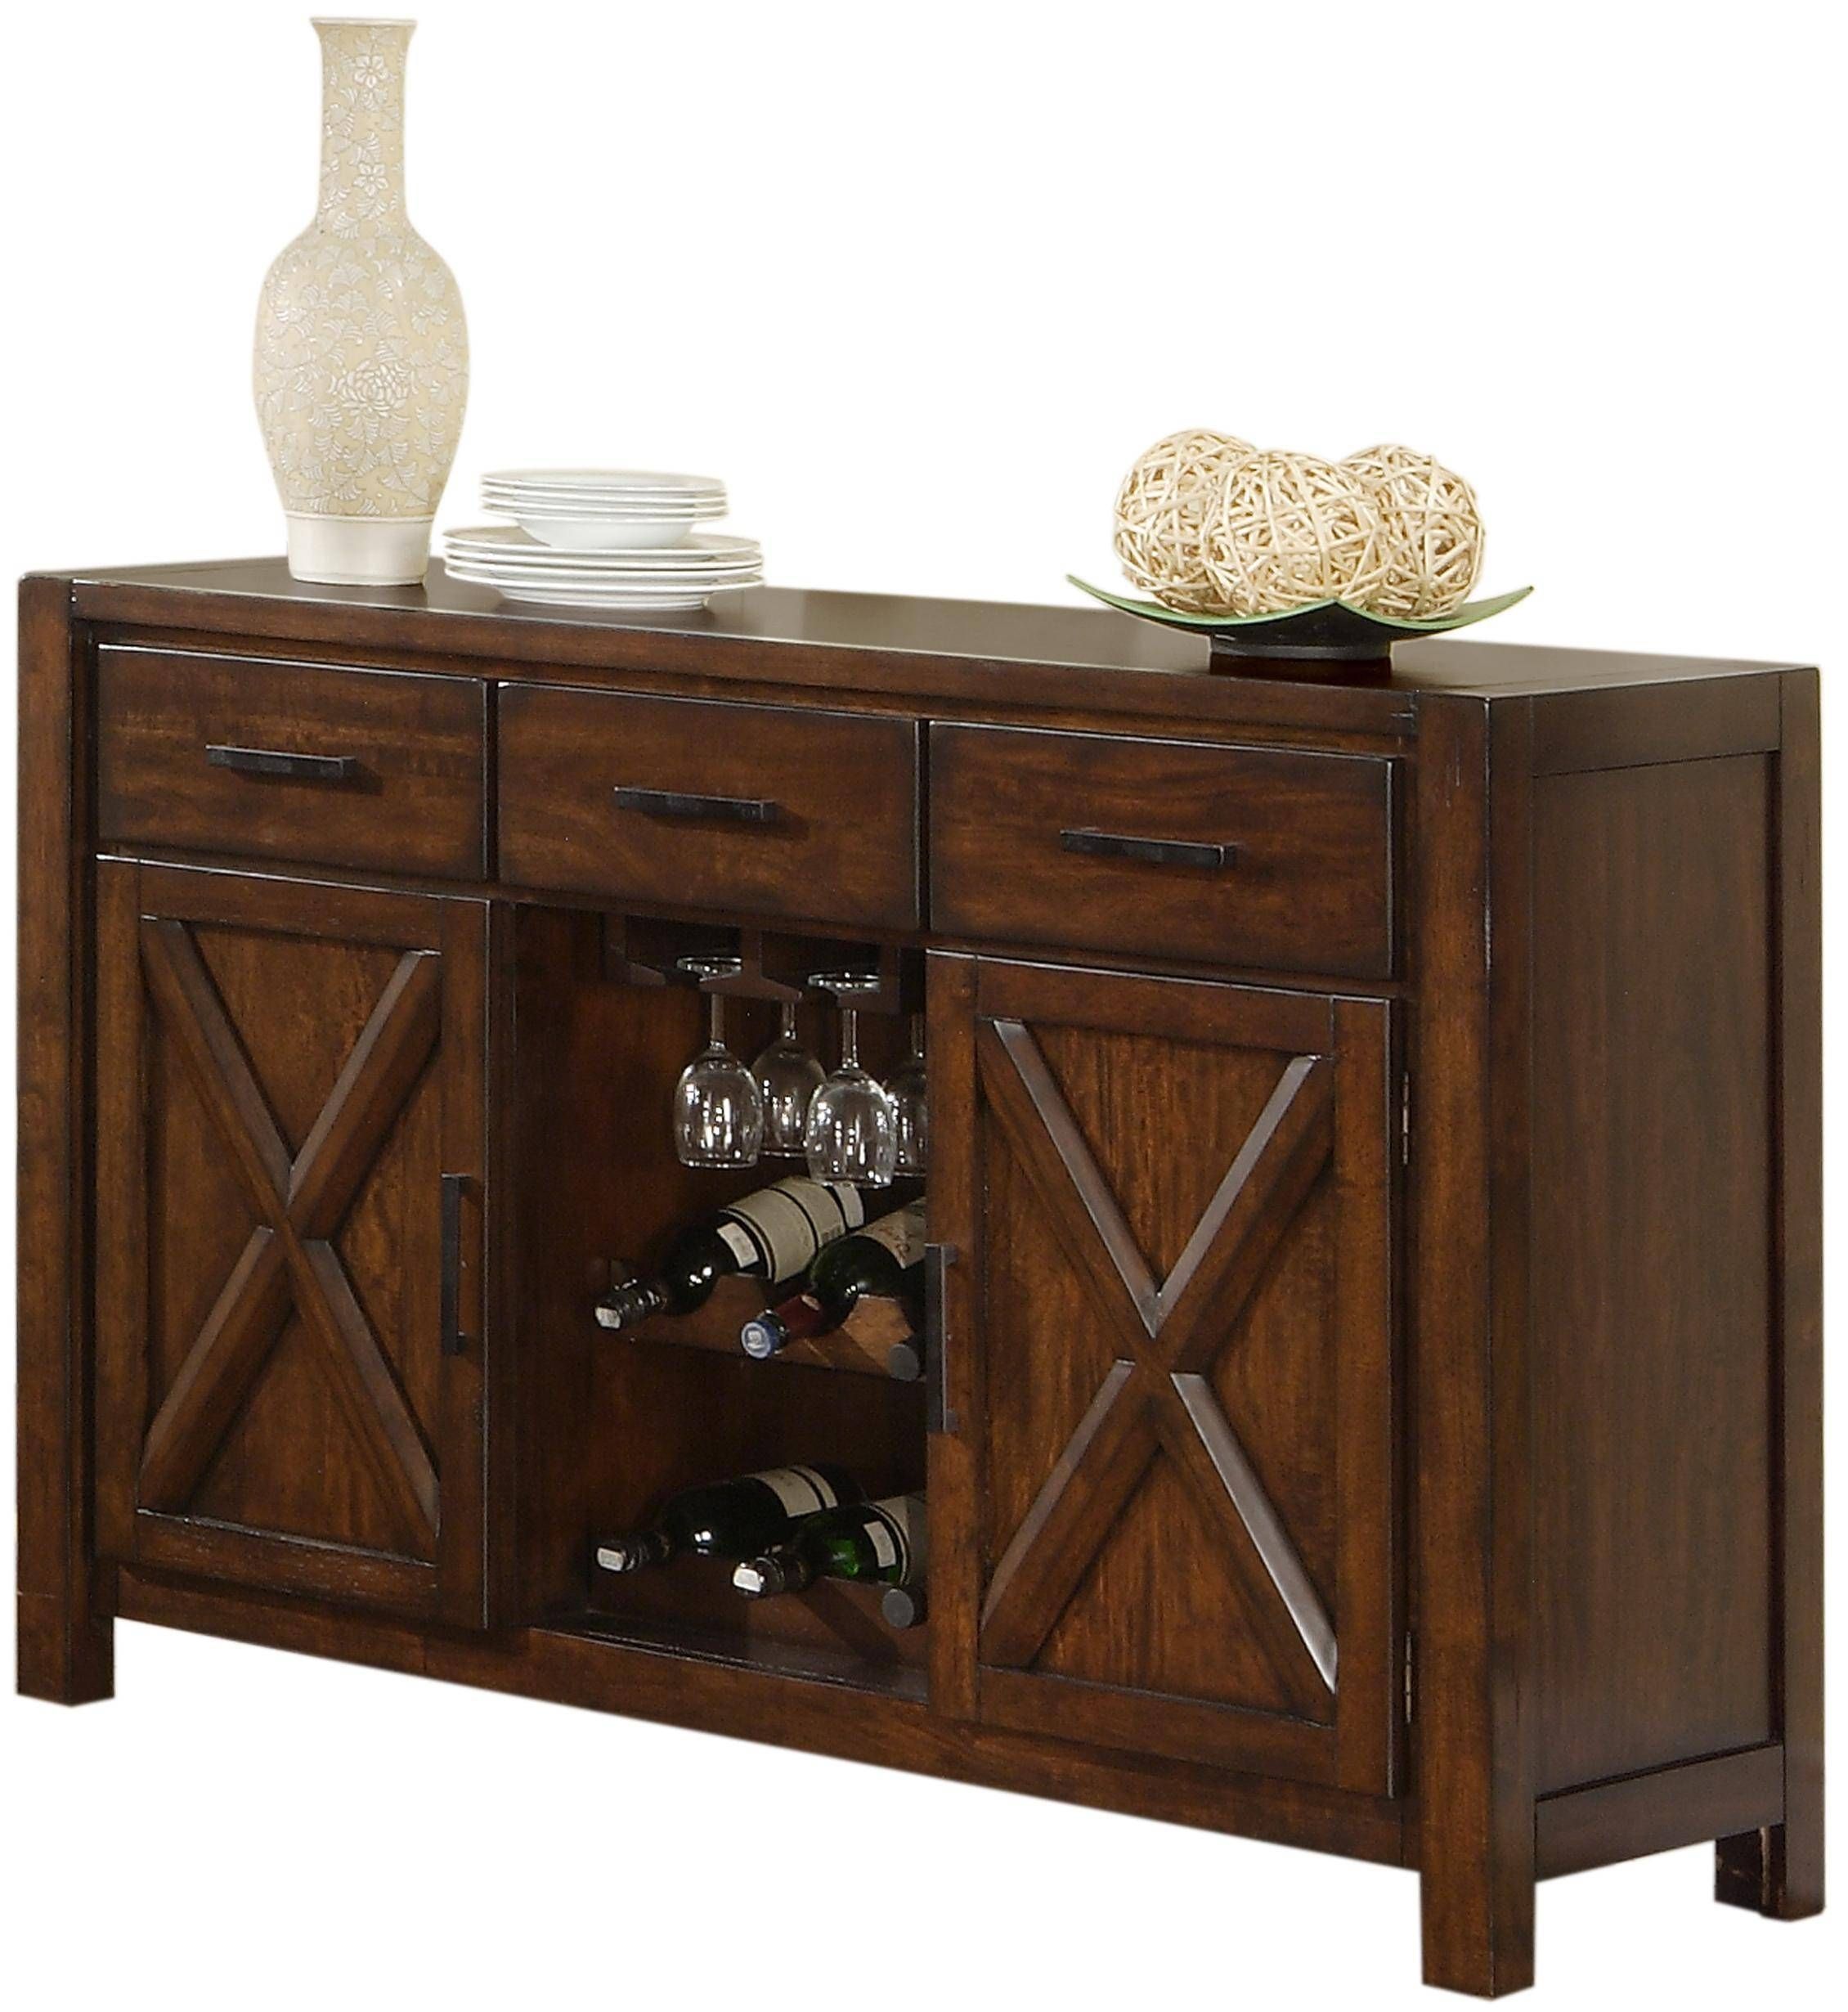 Holland House Lakeshore Dining Sideboard W/ Wine Rack And Stem For Sideboards With Wine Racks (View 16 of 30)